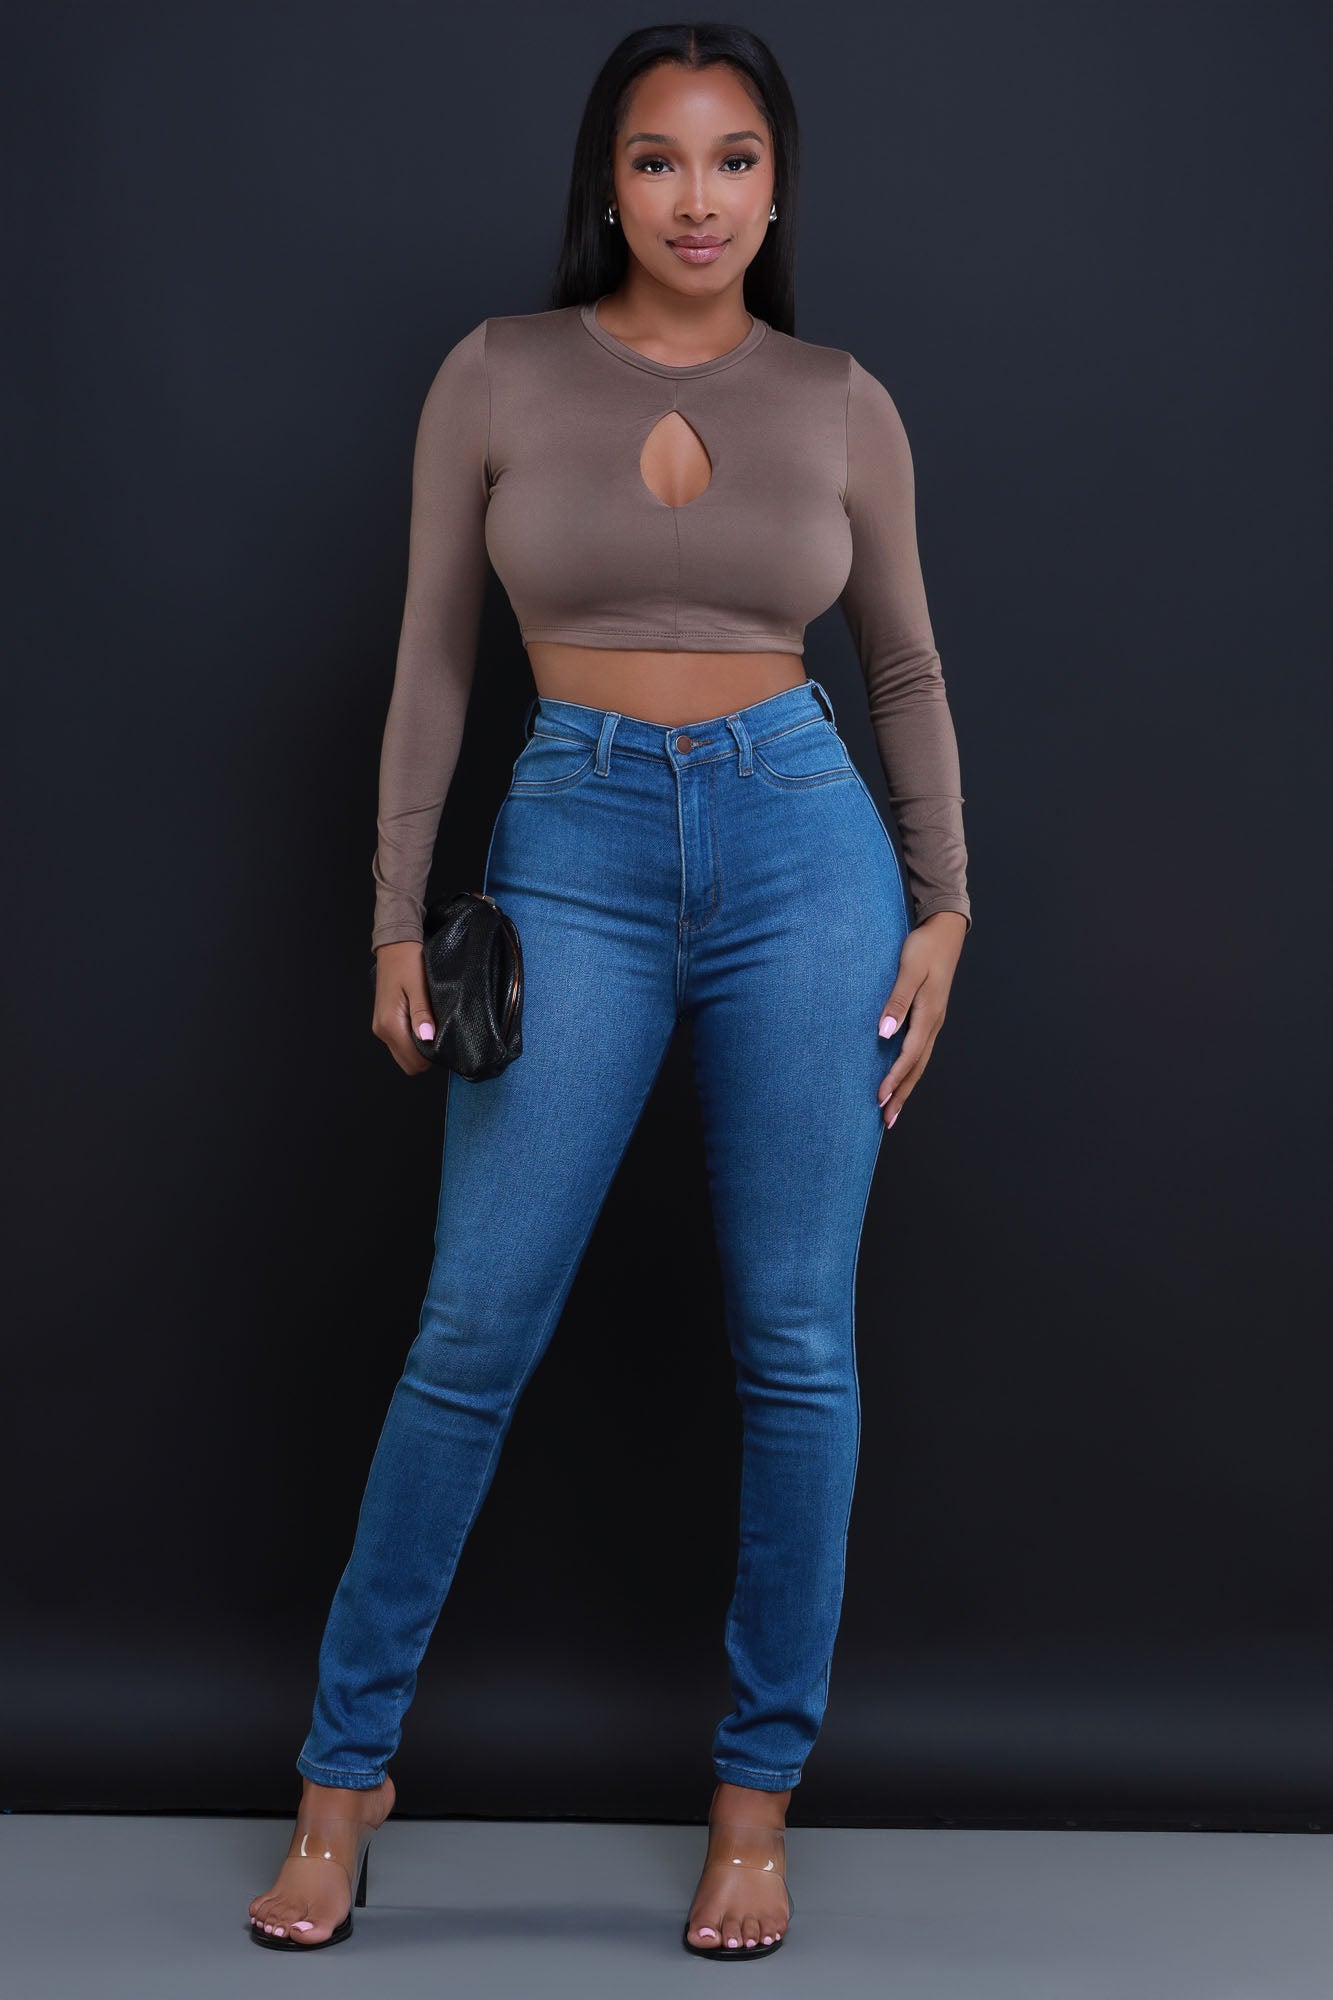 Not Worried Double Layered Keyhole Crop Top - Deep Taupe - Swank A Posh